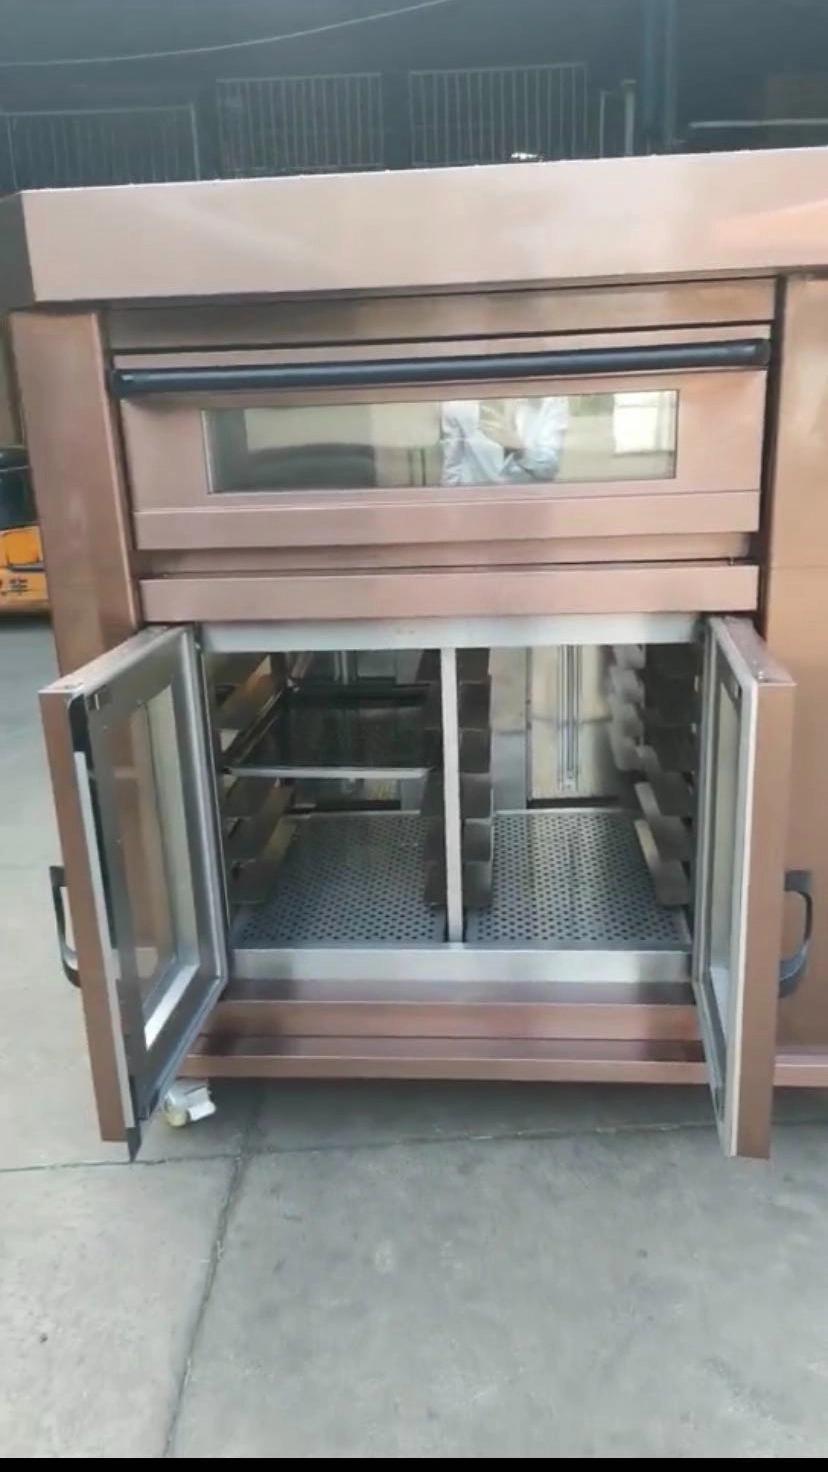 Luxury Bakery Workshop Commercial Bakery Equipment Electric Convection Oven with Proofer